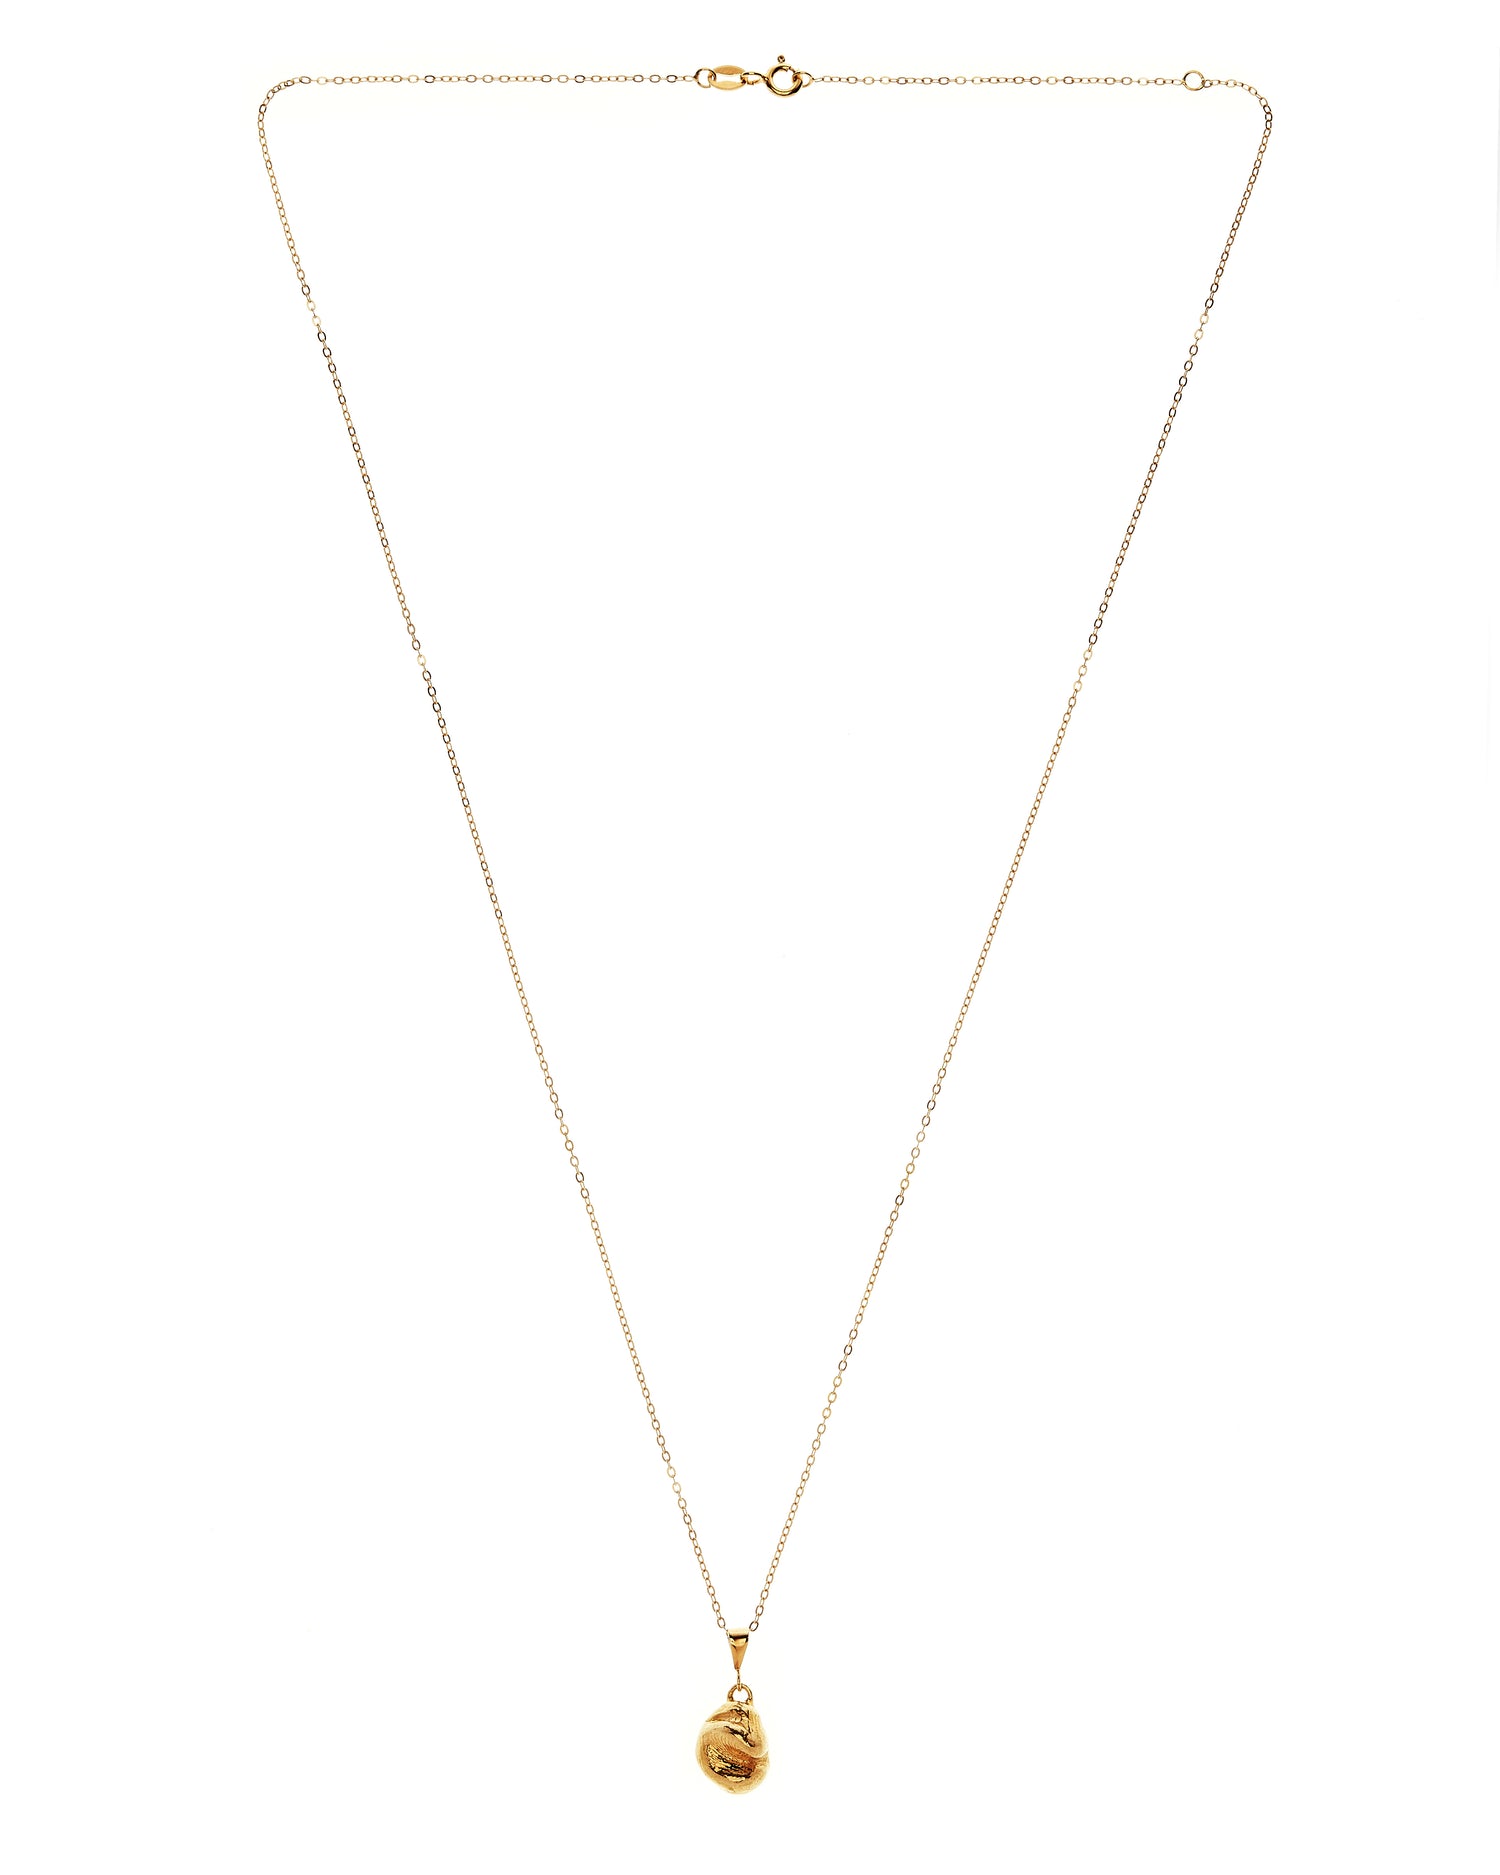 Full view of gold vermeil trace chain with pendant